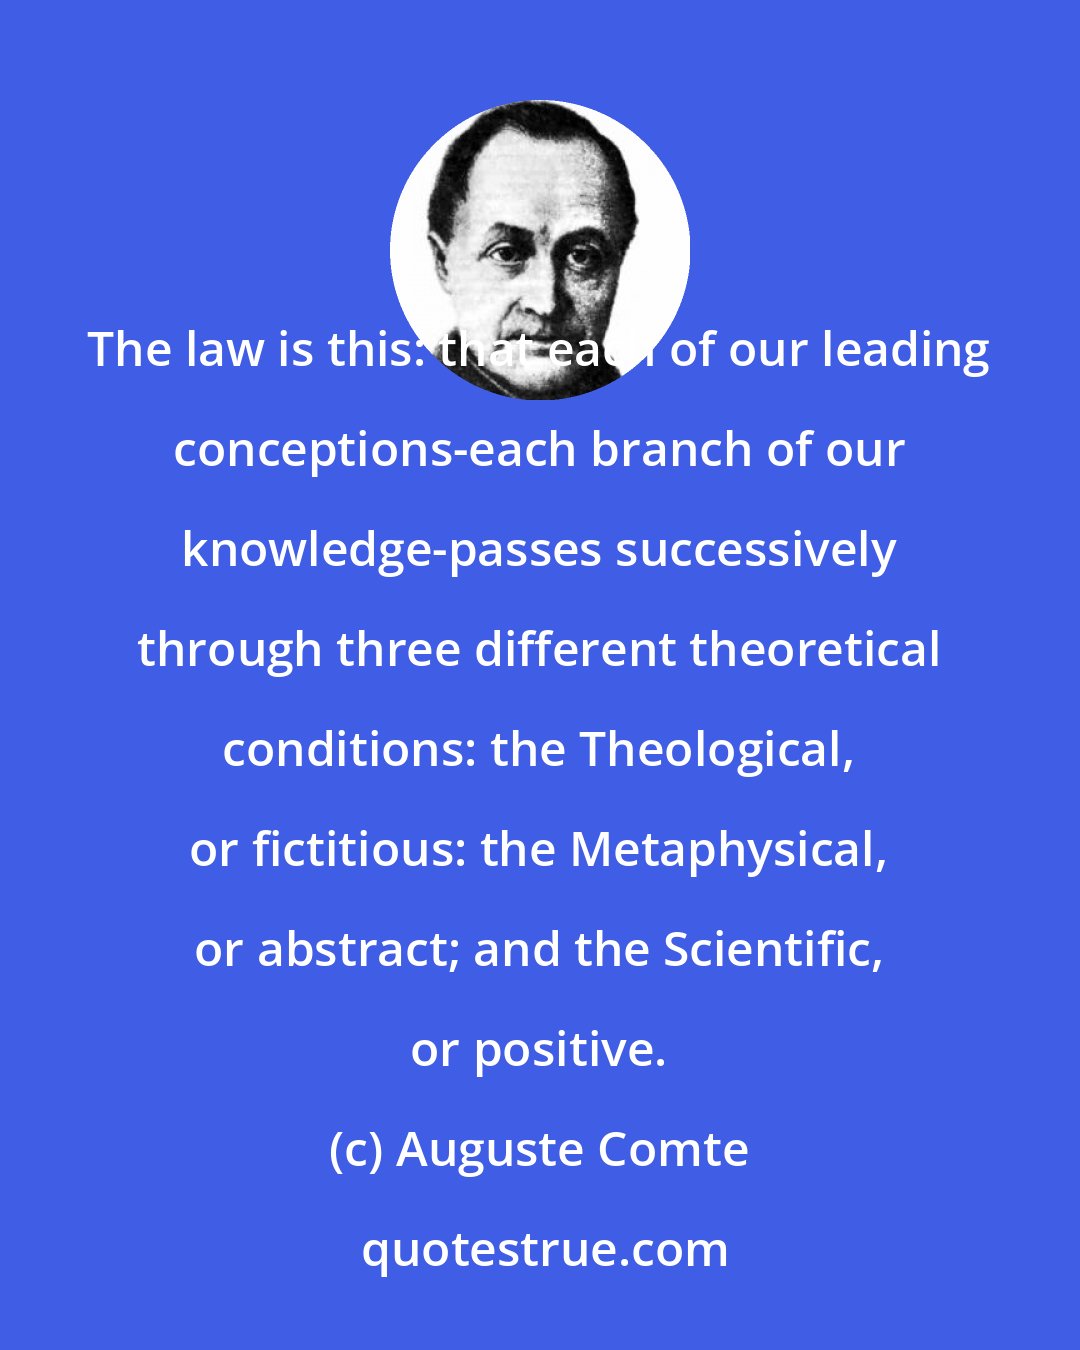 Auguste Comte: The law is this: that each of our leading conceptions-each branch of our knowledge-passes successively through three different theoretical conditions: the Theological, or fictitious: the Metaphysical, or abstract; and the Scientific, or positive.